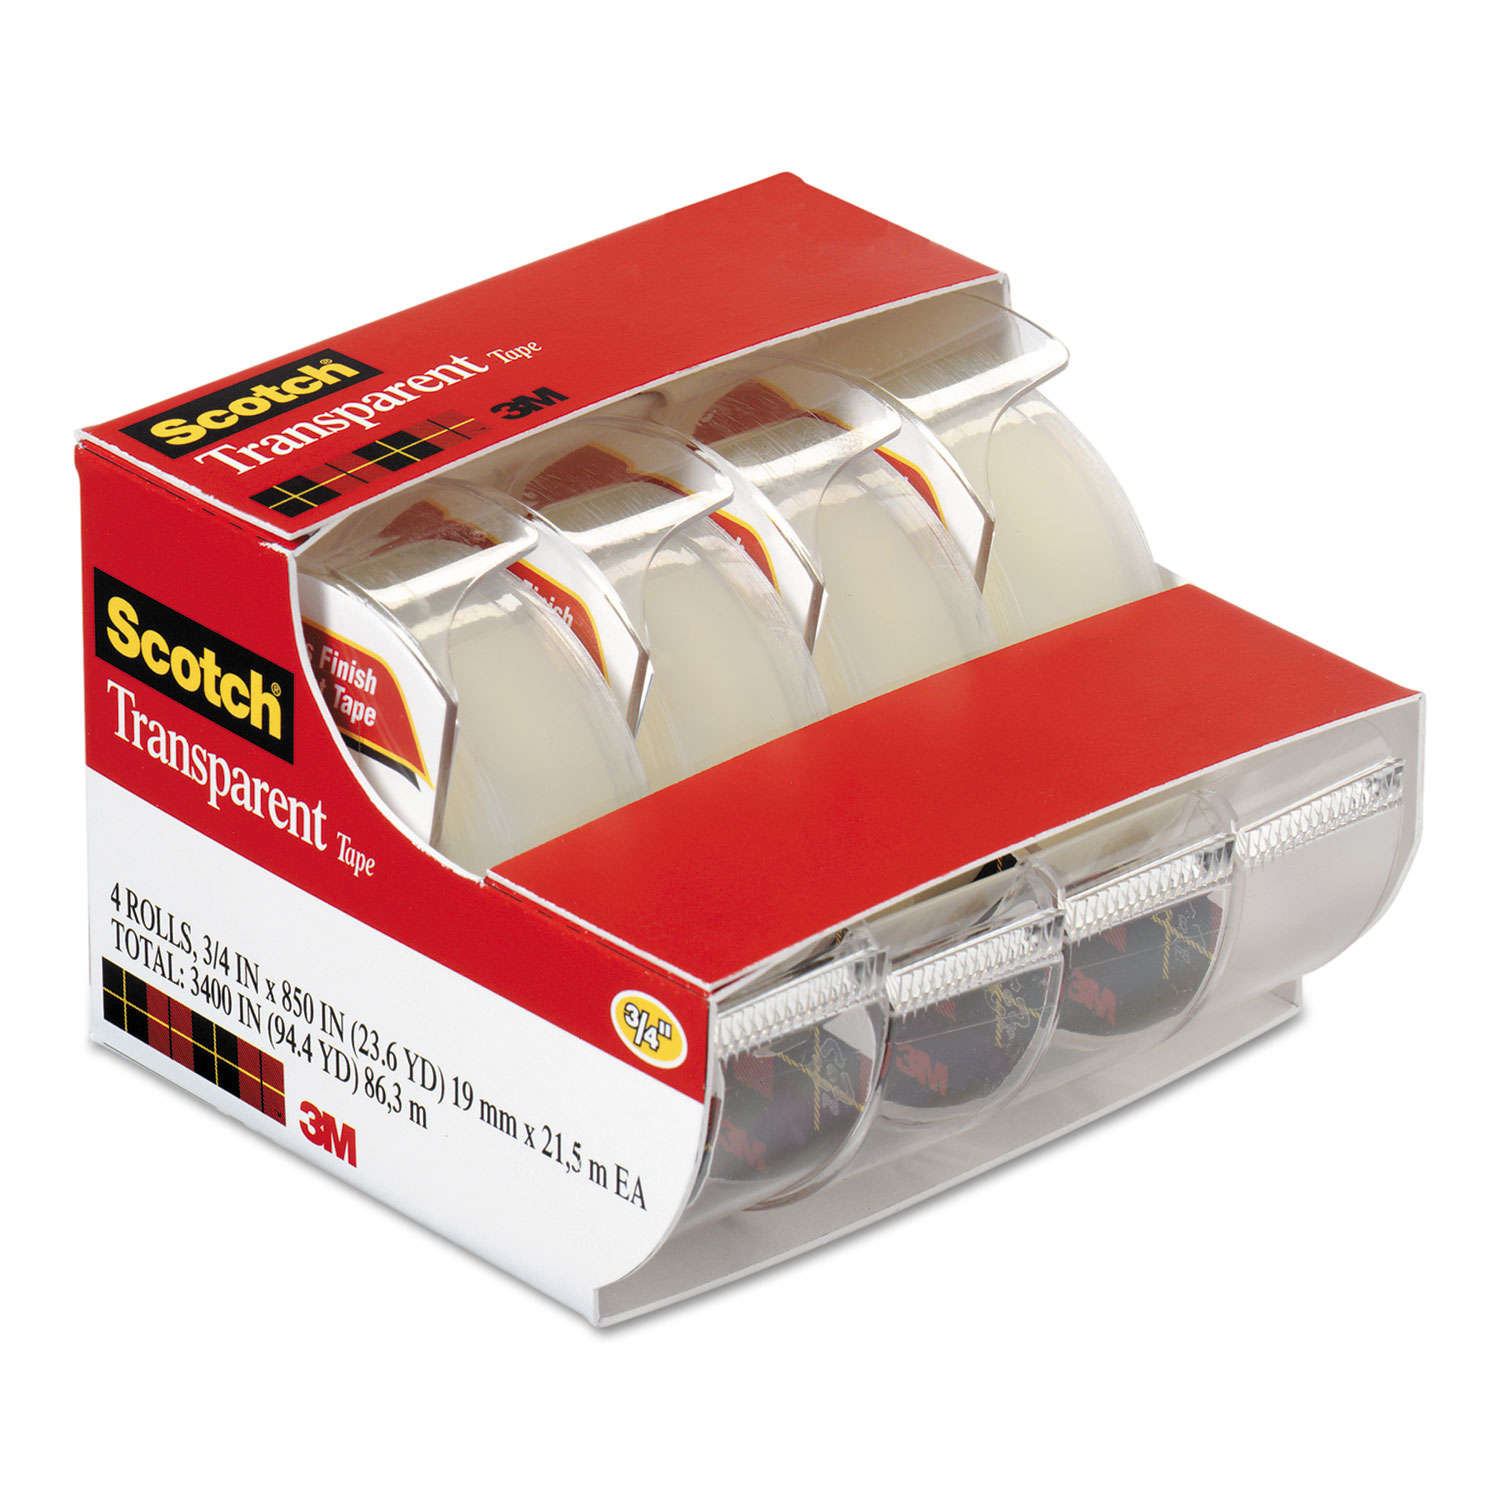 Scotch Super-Hold Invisible Tape - 18 yd (16.5 m) Length x 0.75 (19 mm)  Width - Dispenser Included - 1 Each - Clear - Mills